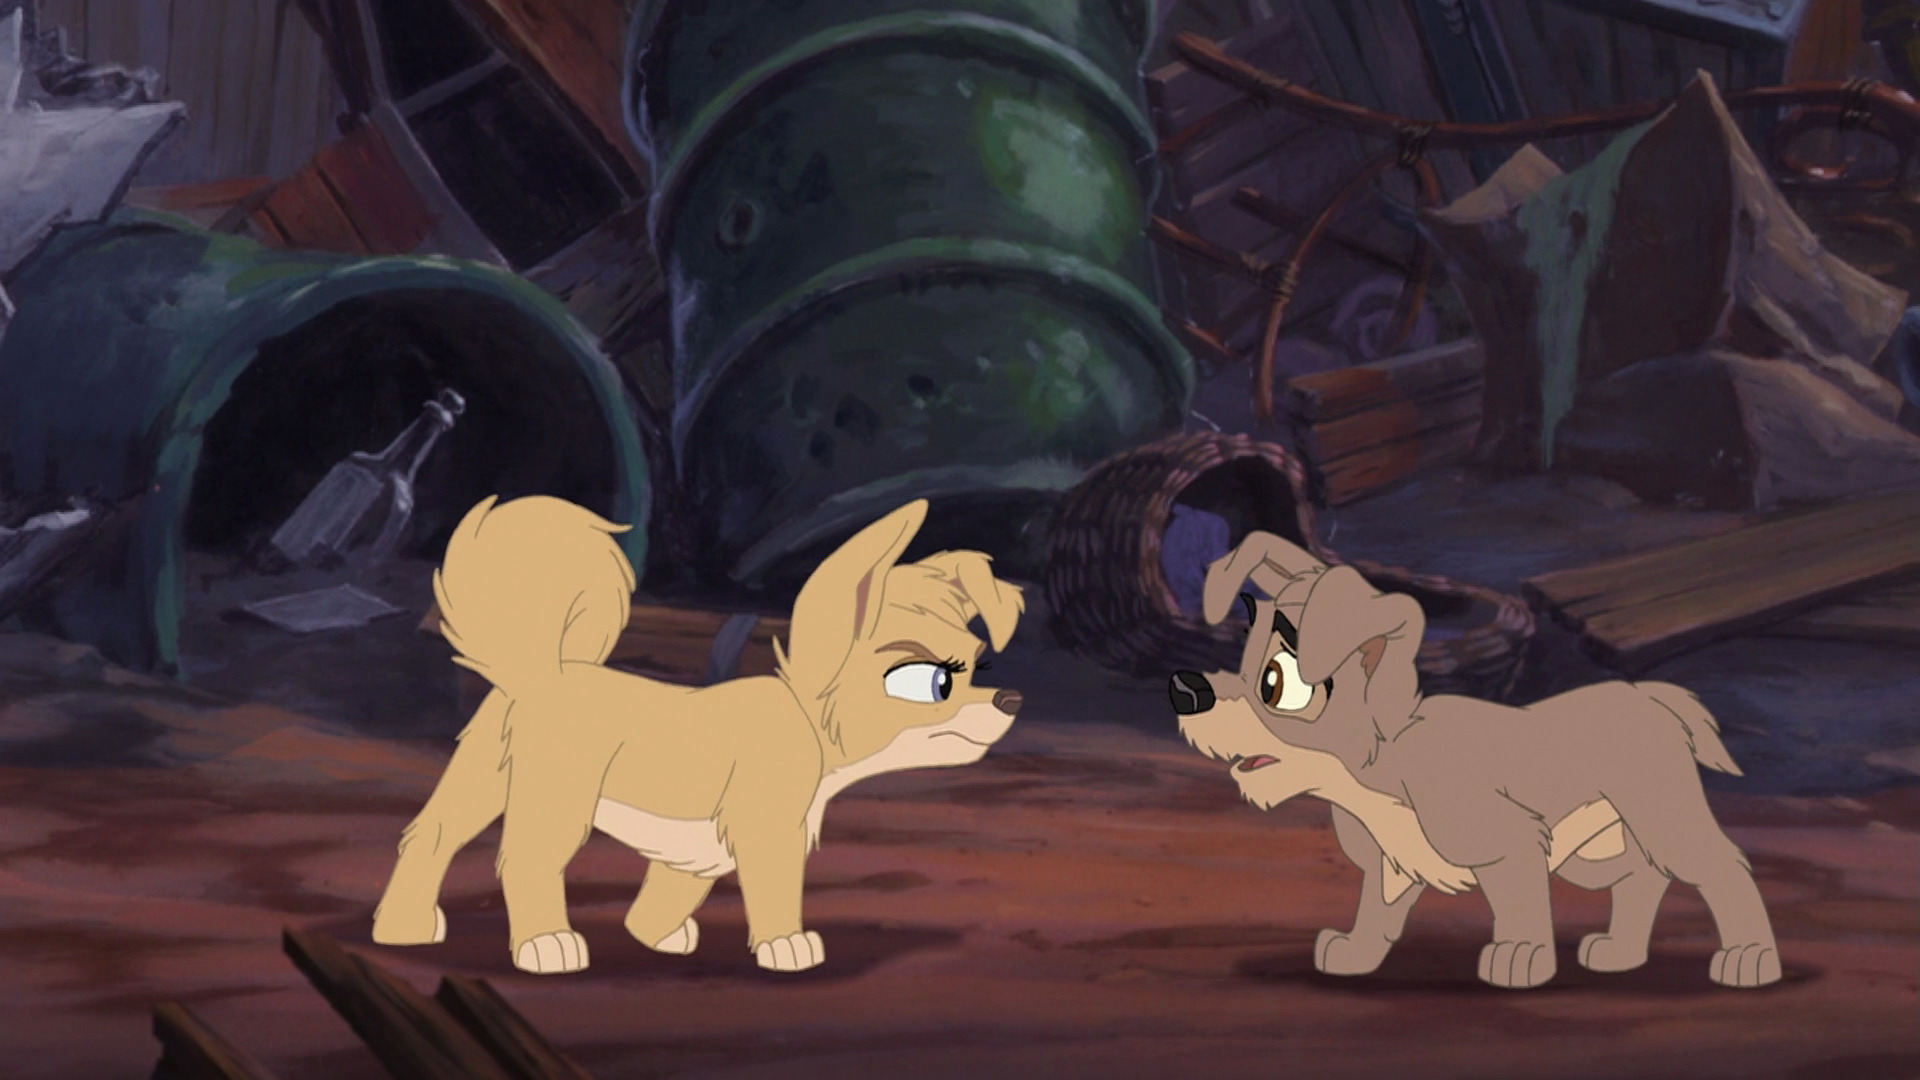 Lady And The Tramp II Scamps Adventure and the Tramp II wallpaper